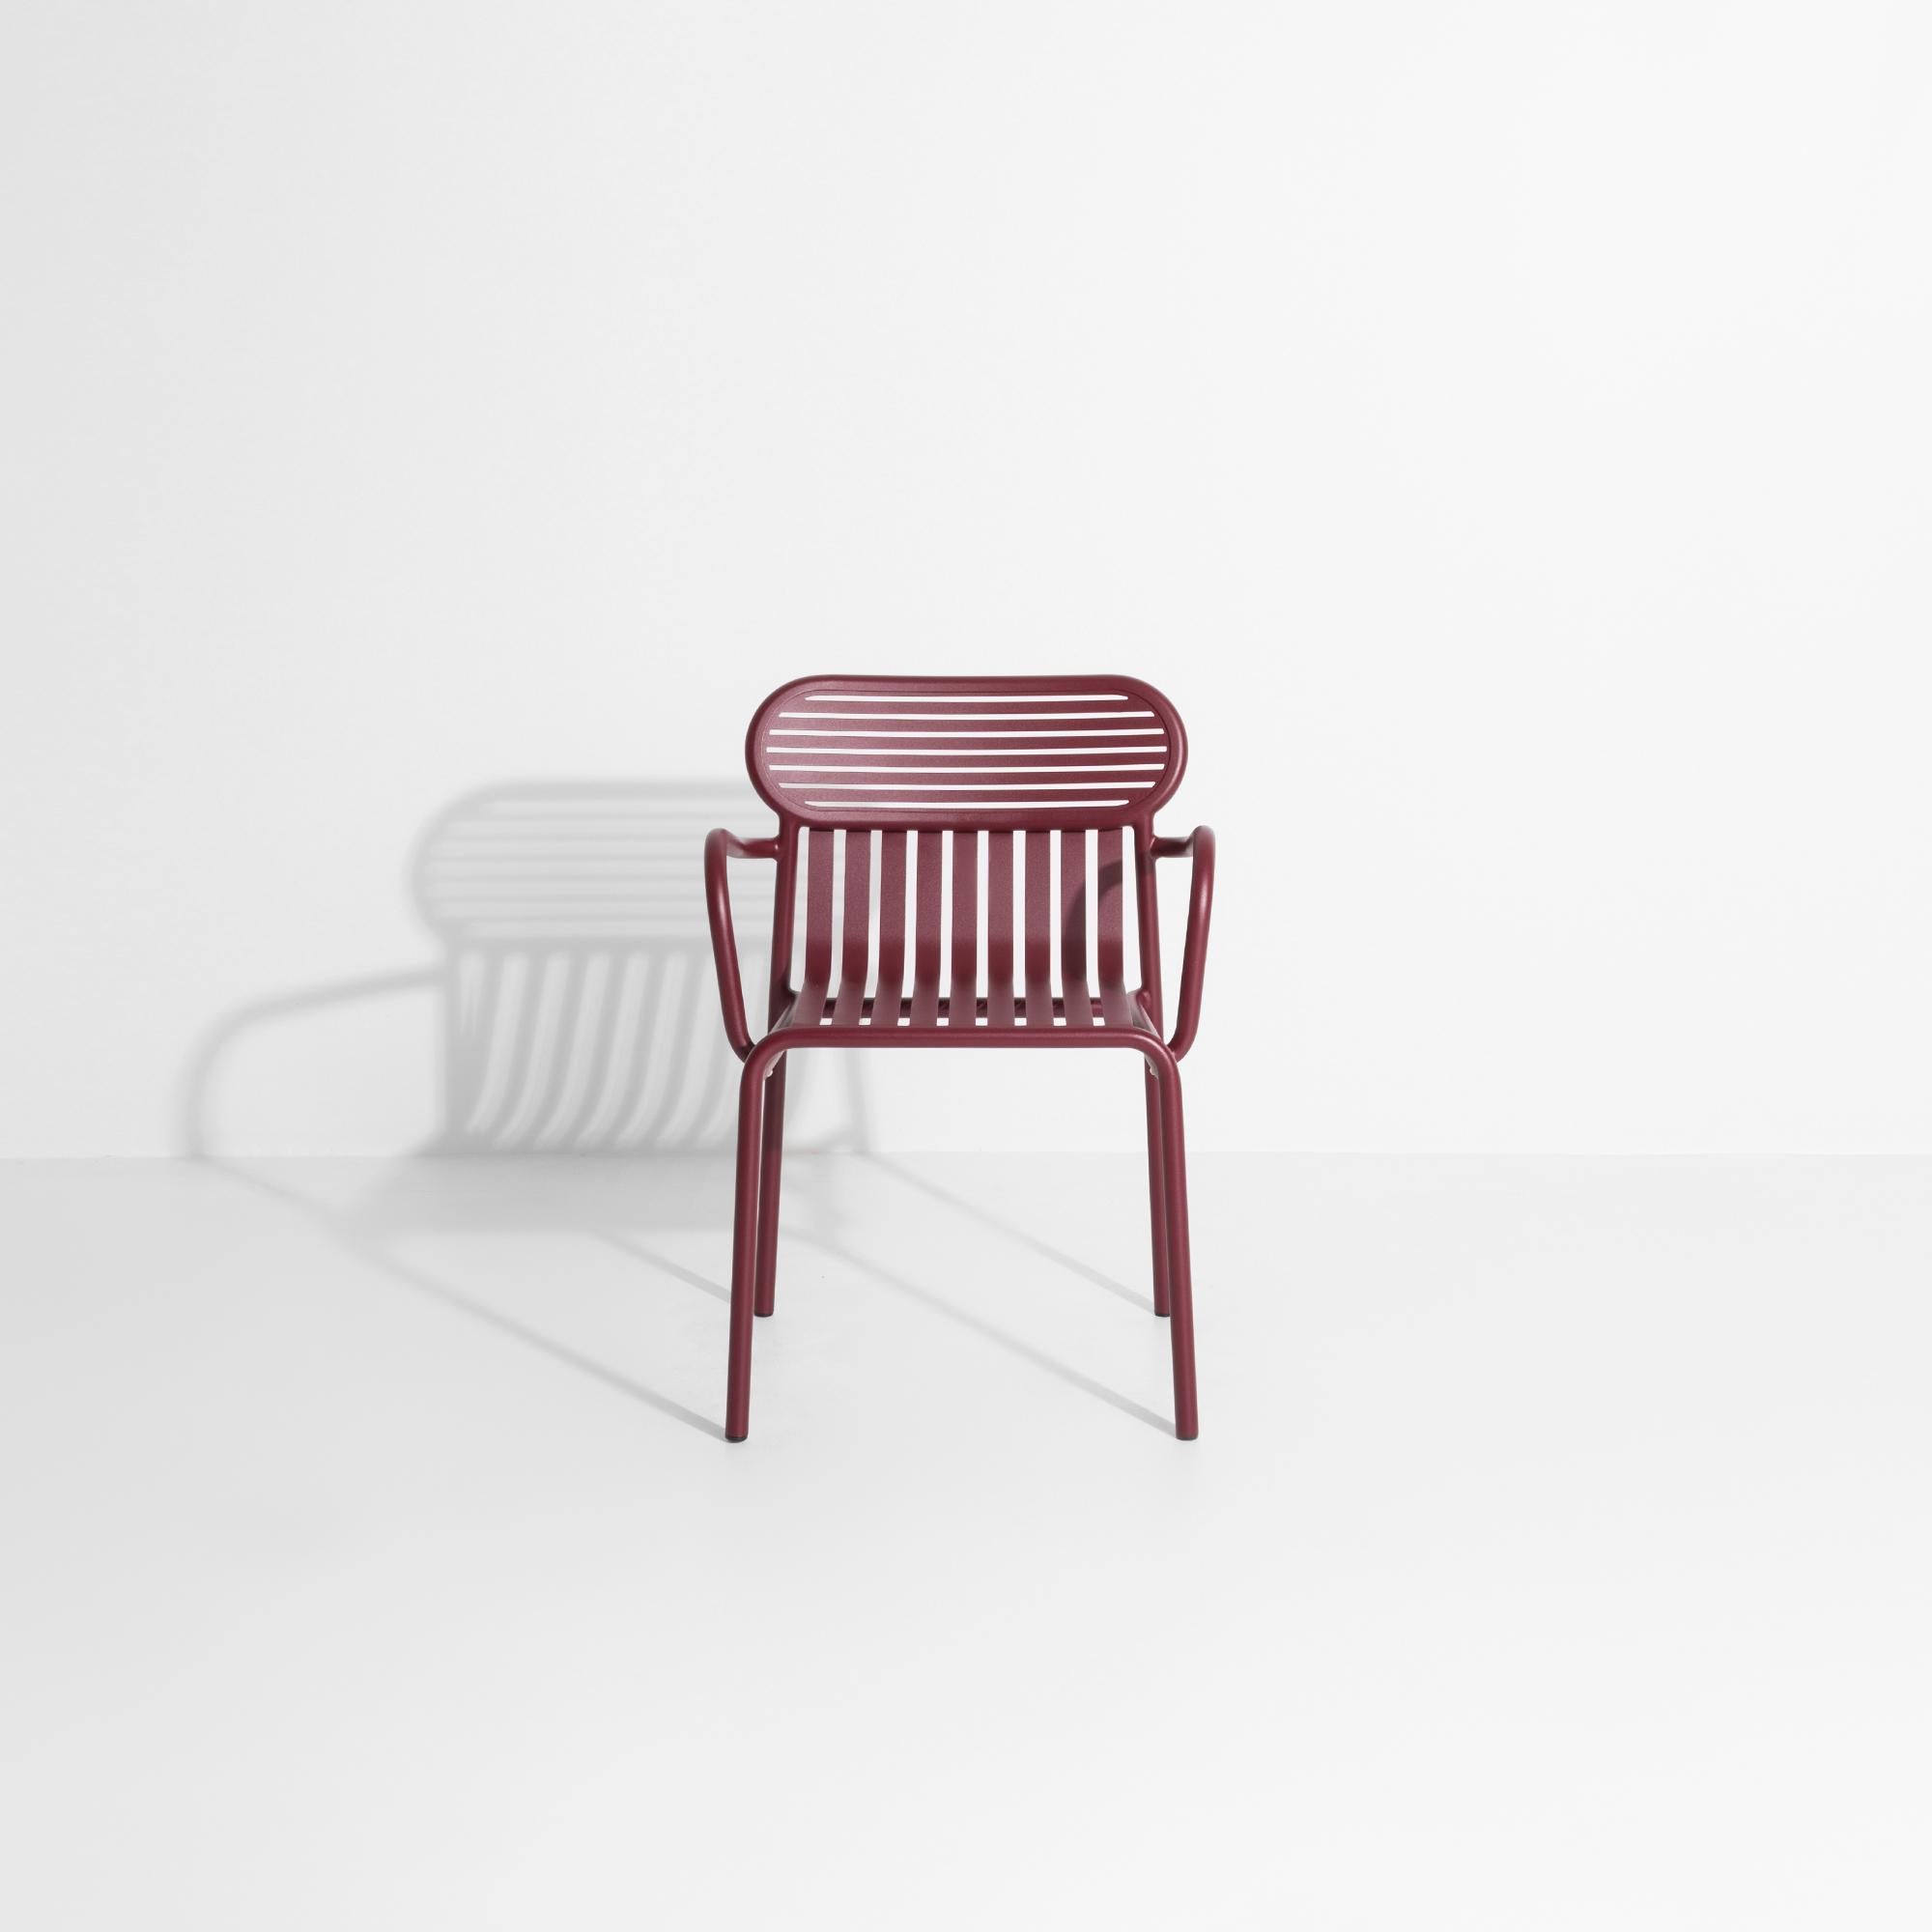 Petite Friture Week-End Bridge Chair in Burgundy Aluminium, 2017 In New Condition For Sale In Brooklyn, NY